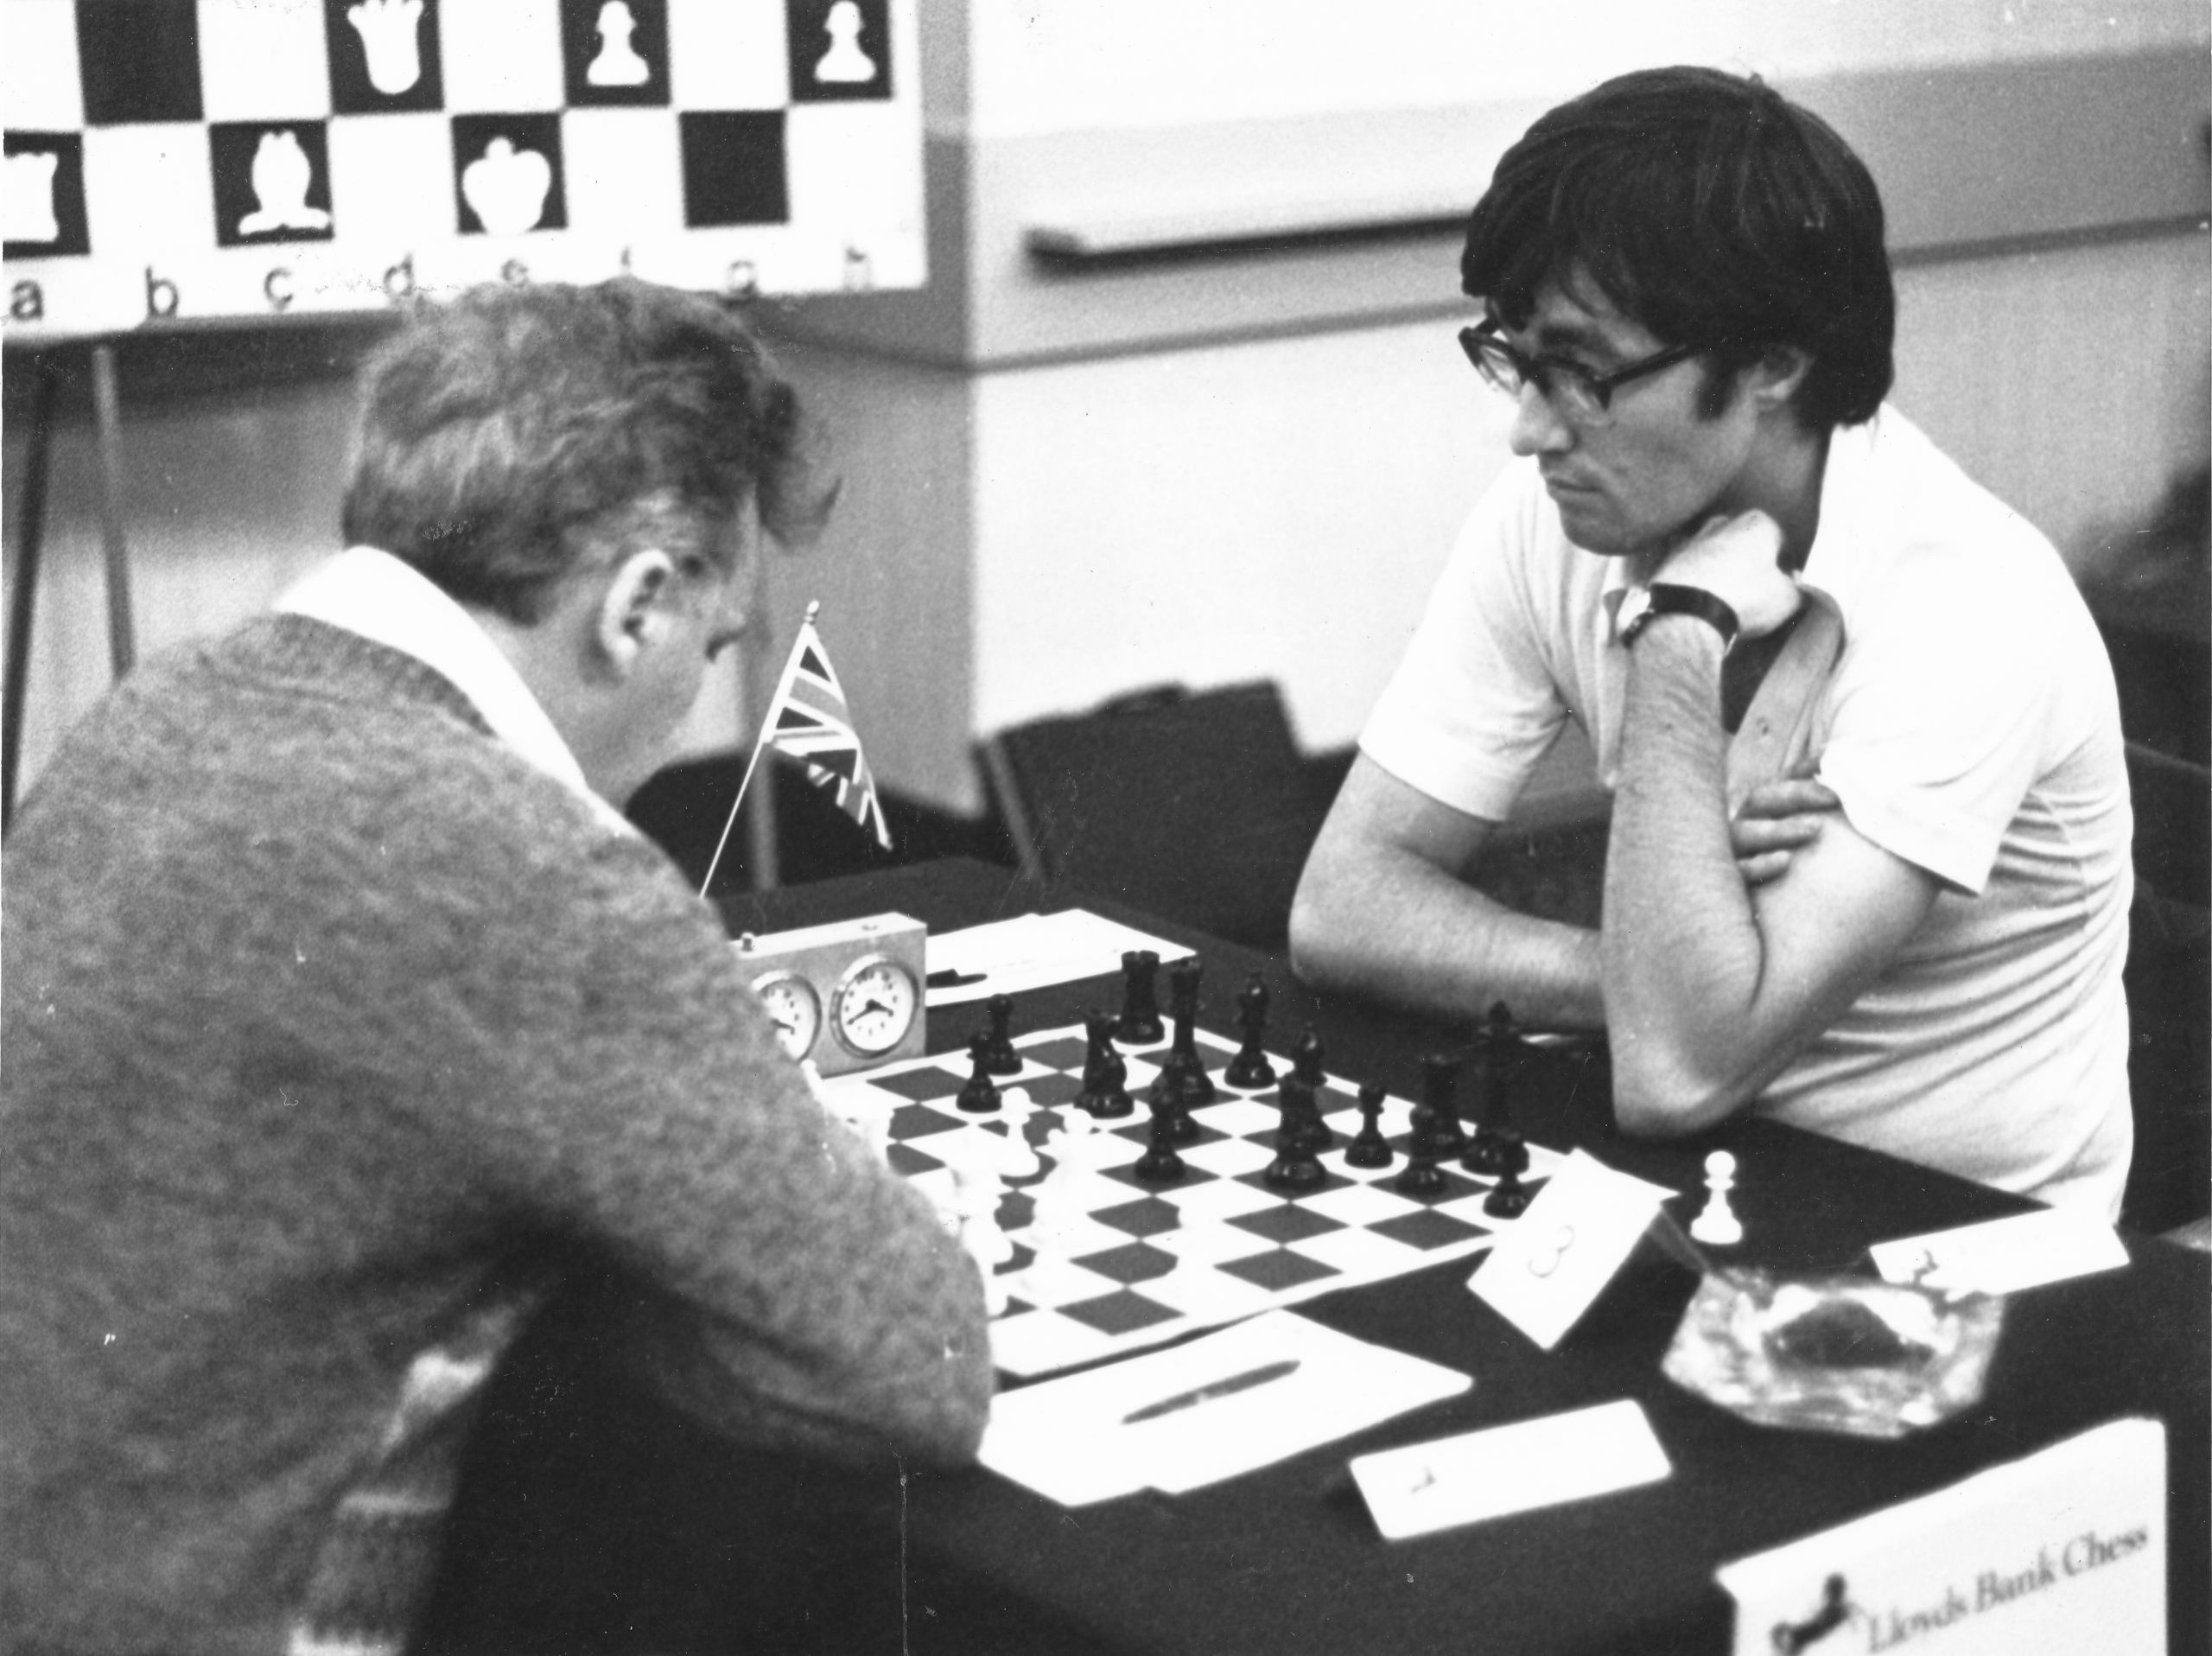 Leonid Shamkovich plays Paul Littlewood during the 1978 Lloyds Bank Masters. Paul won the game.